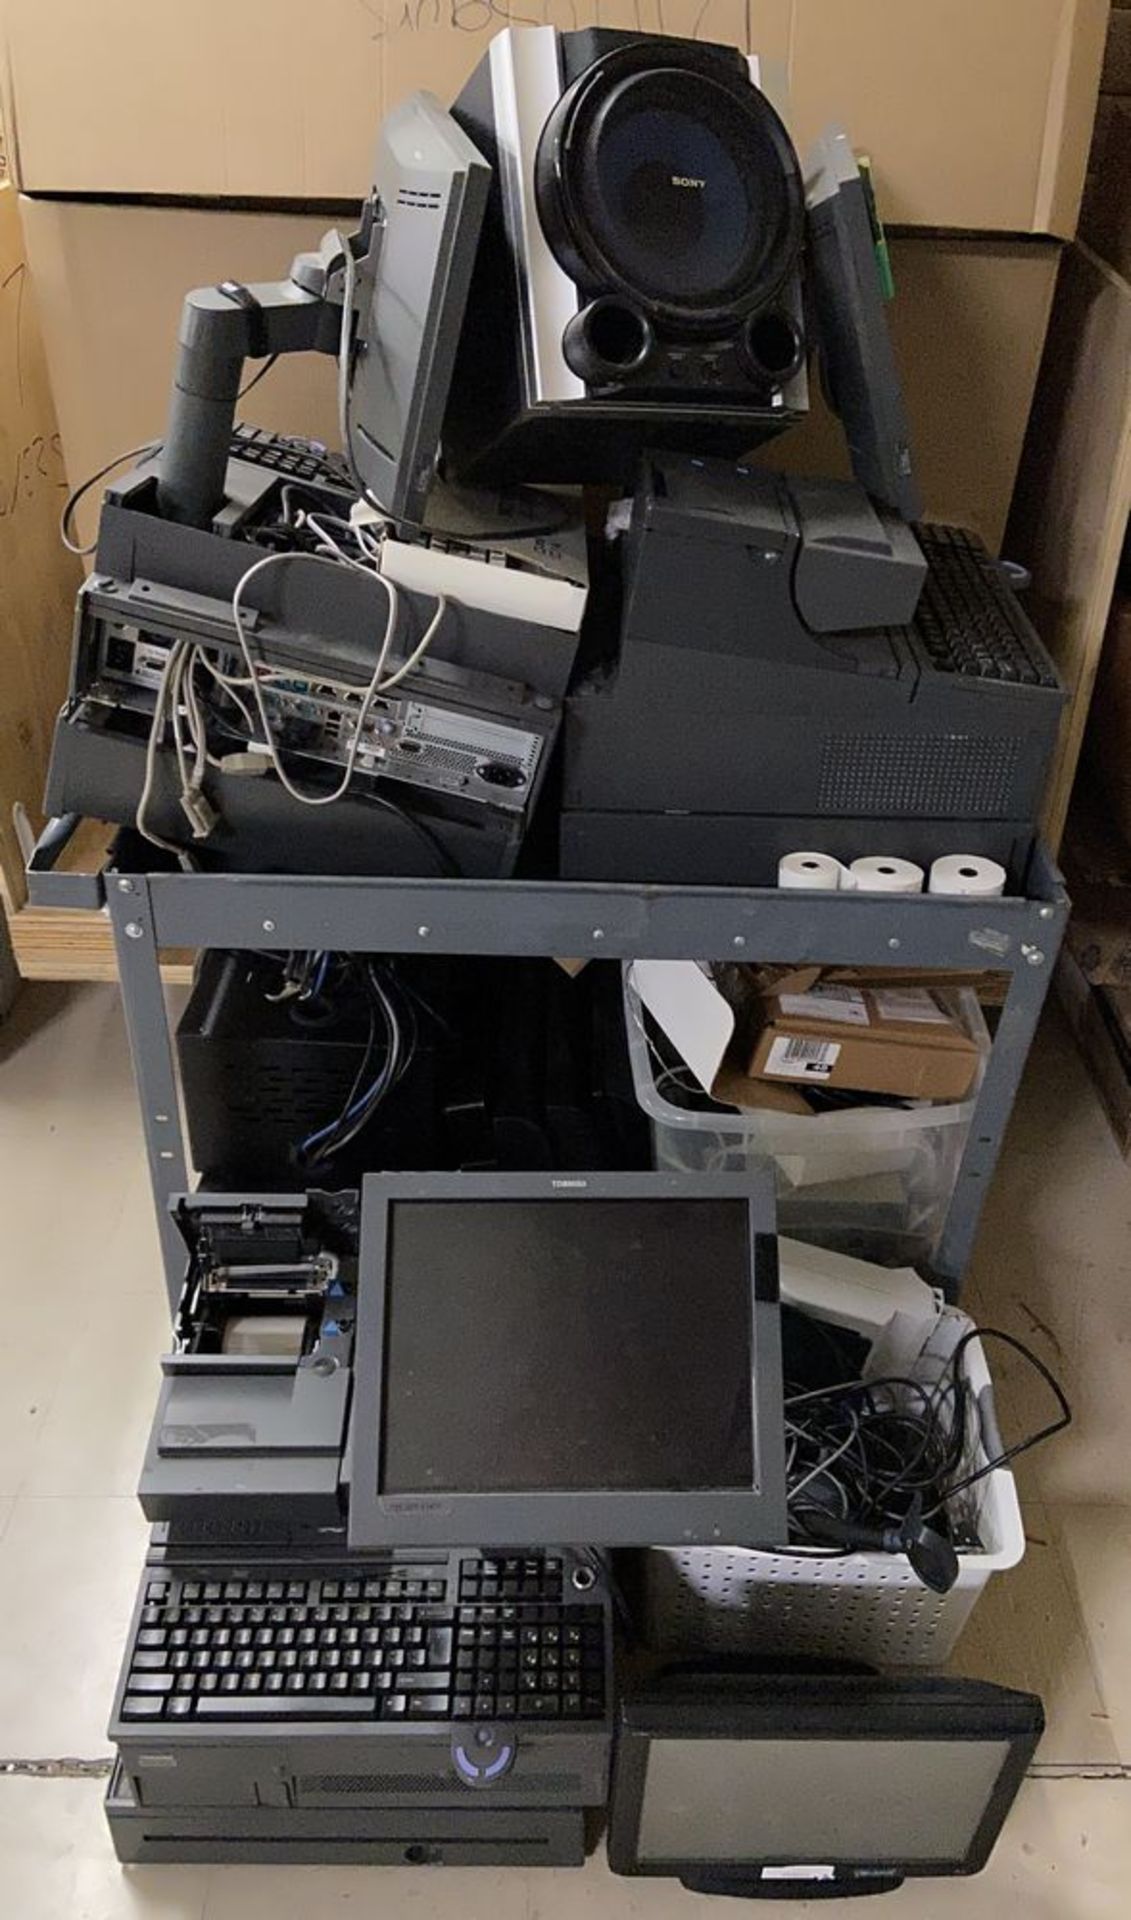 Pallet of Toshiba POS Cash Registers, Computer Towers and Cables etc - Image 5 of 6